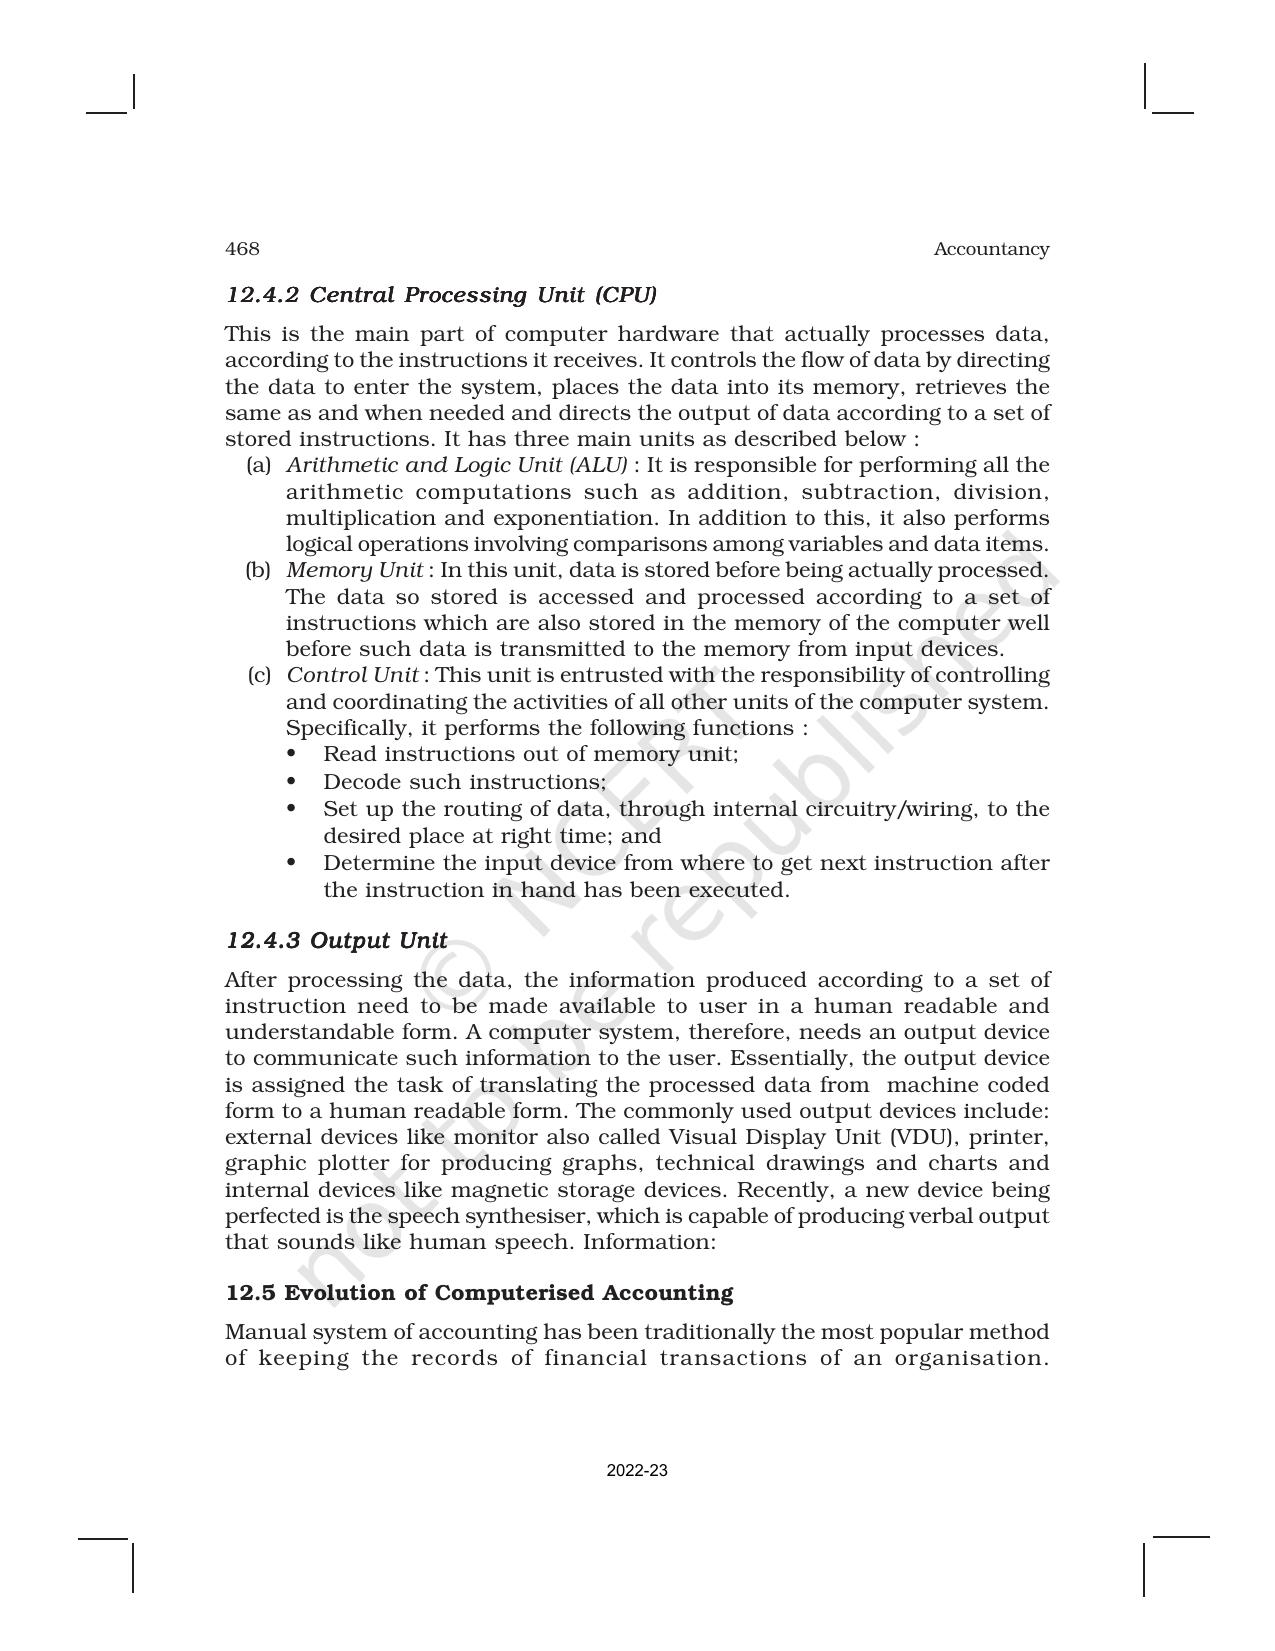 NCERT Book for Class 11 Accountancy (Part-II) Chapter 12 Applications of Computers in Accounting - Page 6